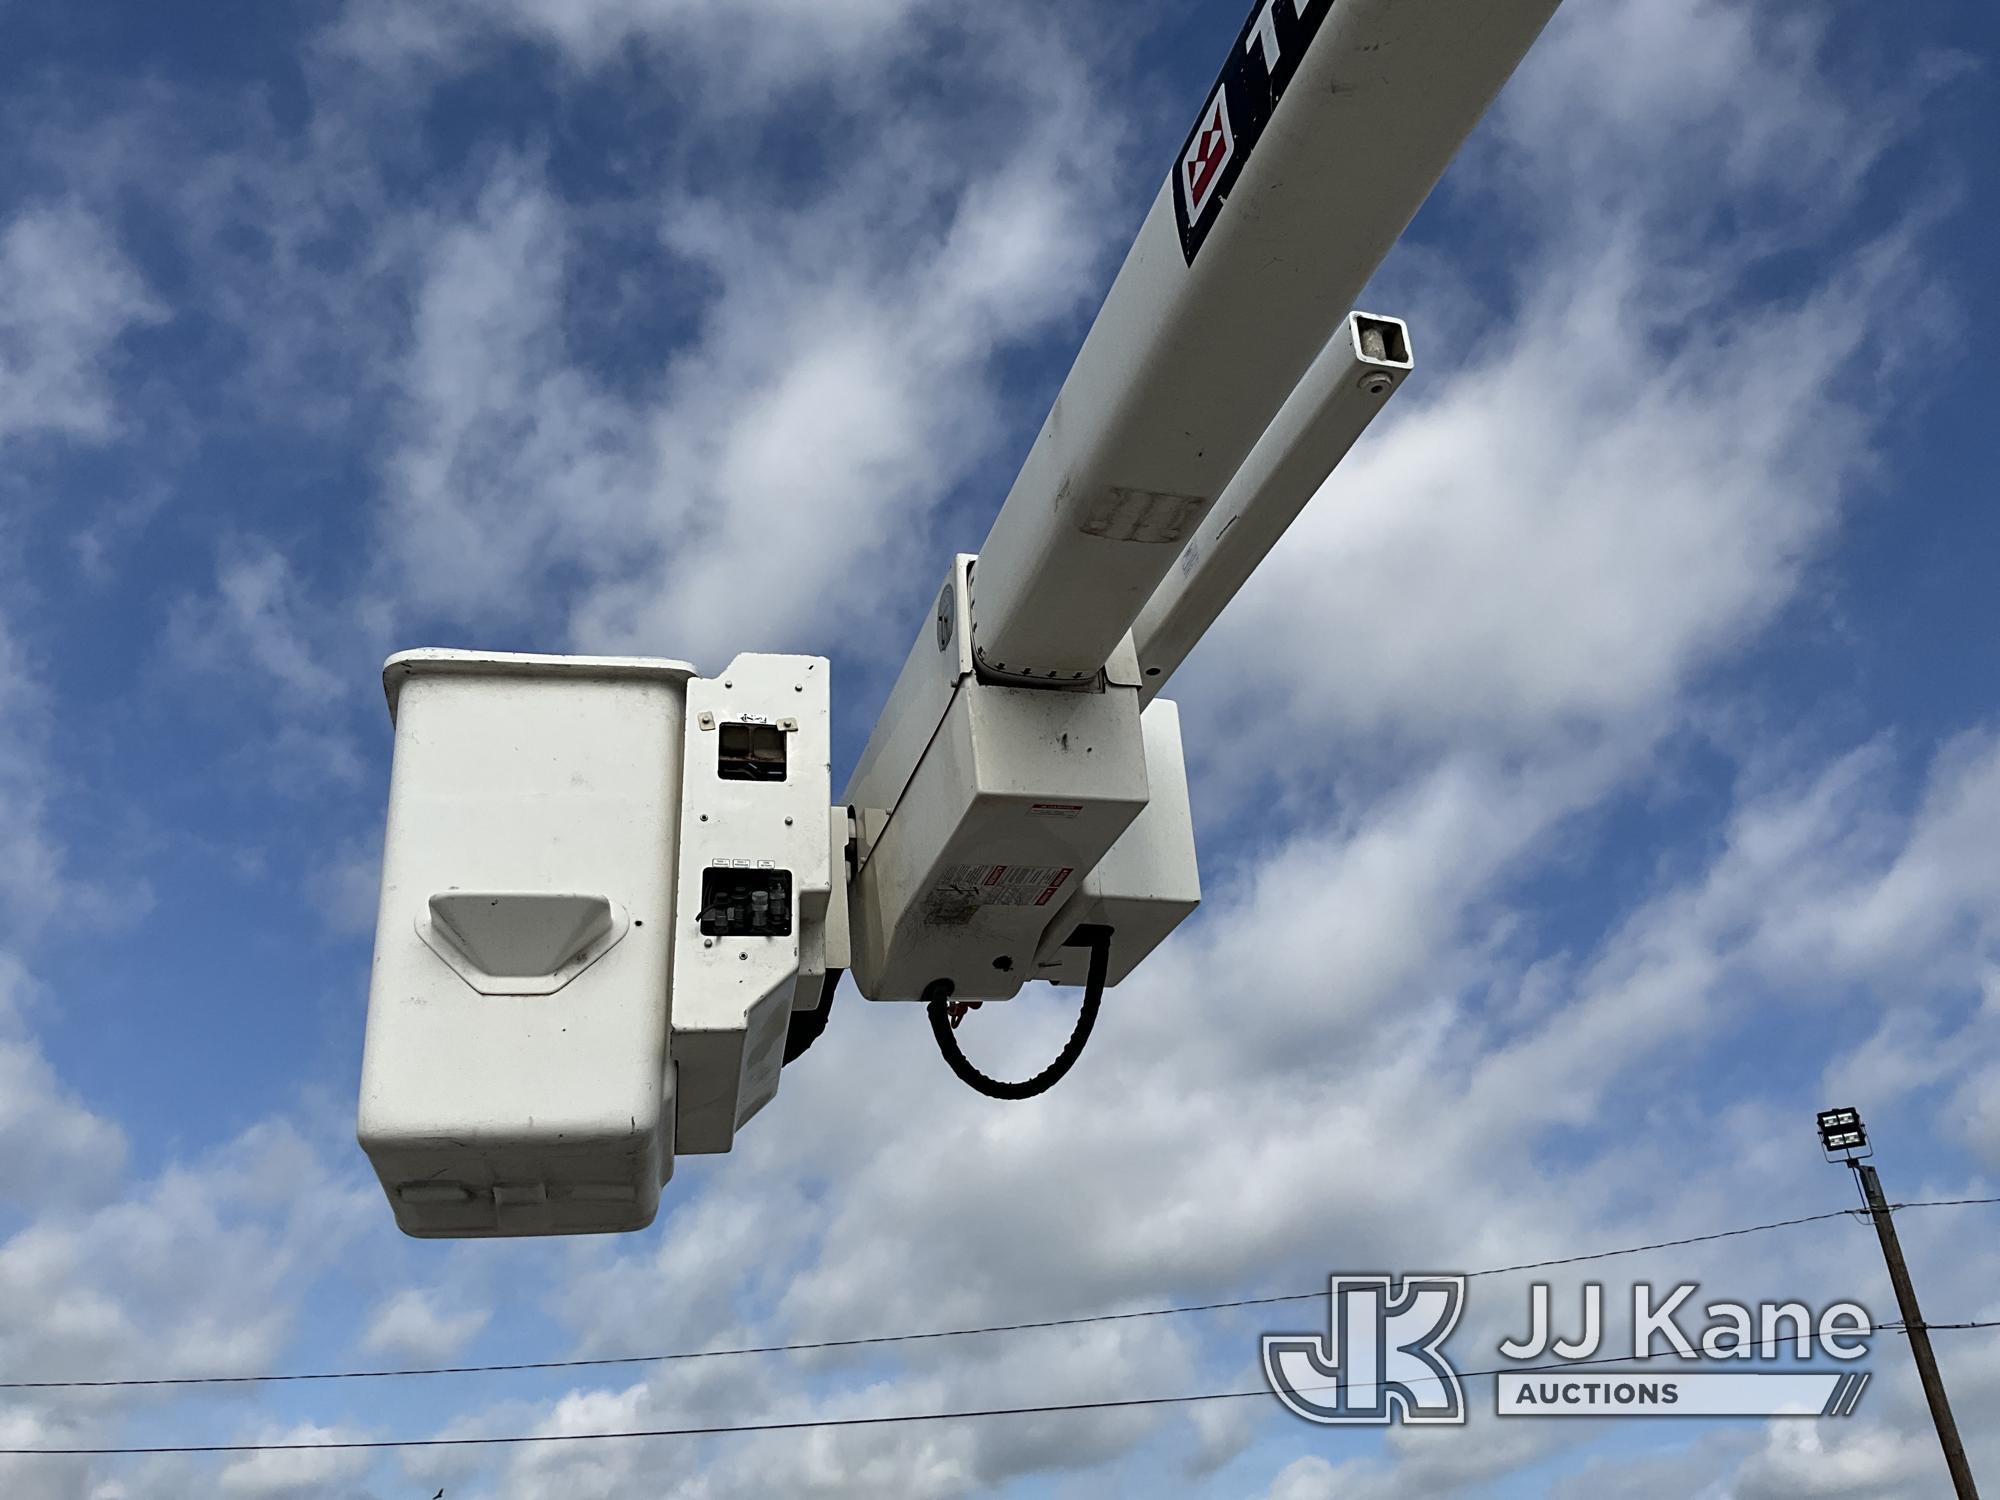 (Azle, TX) HiRanger HR40-M, Material Handling Bucket Truck mounted behind cab on 2018 Ford F550 4x4